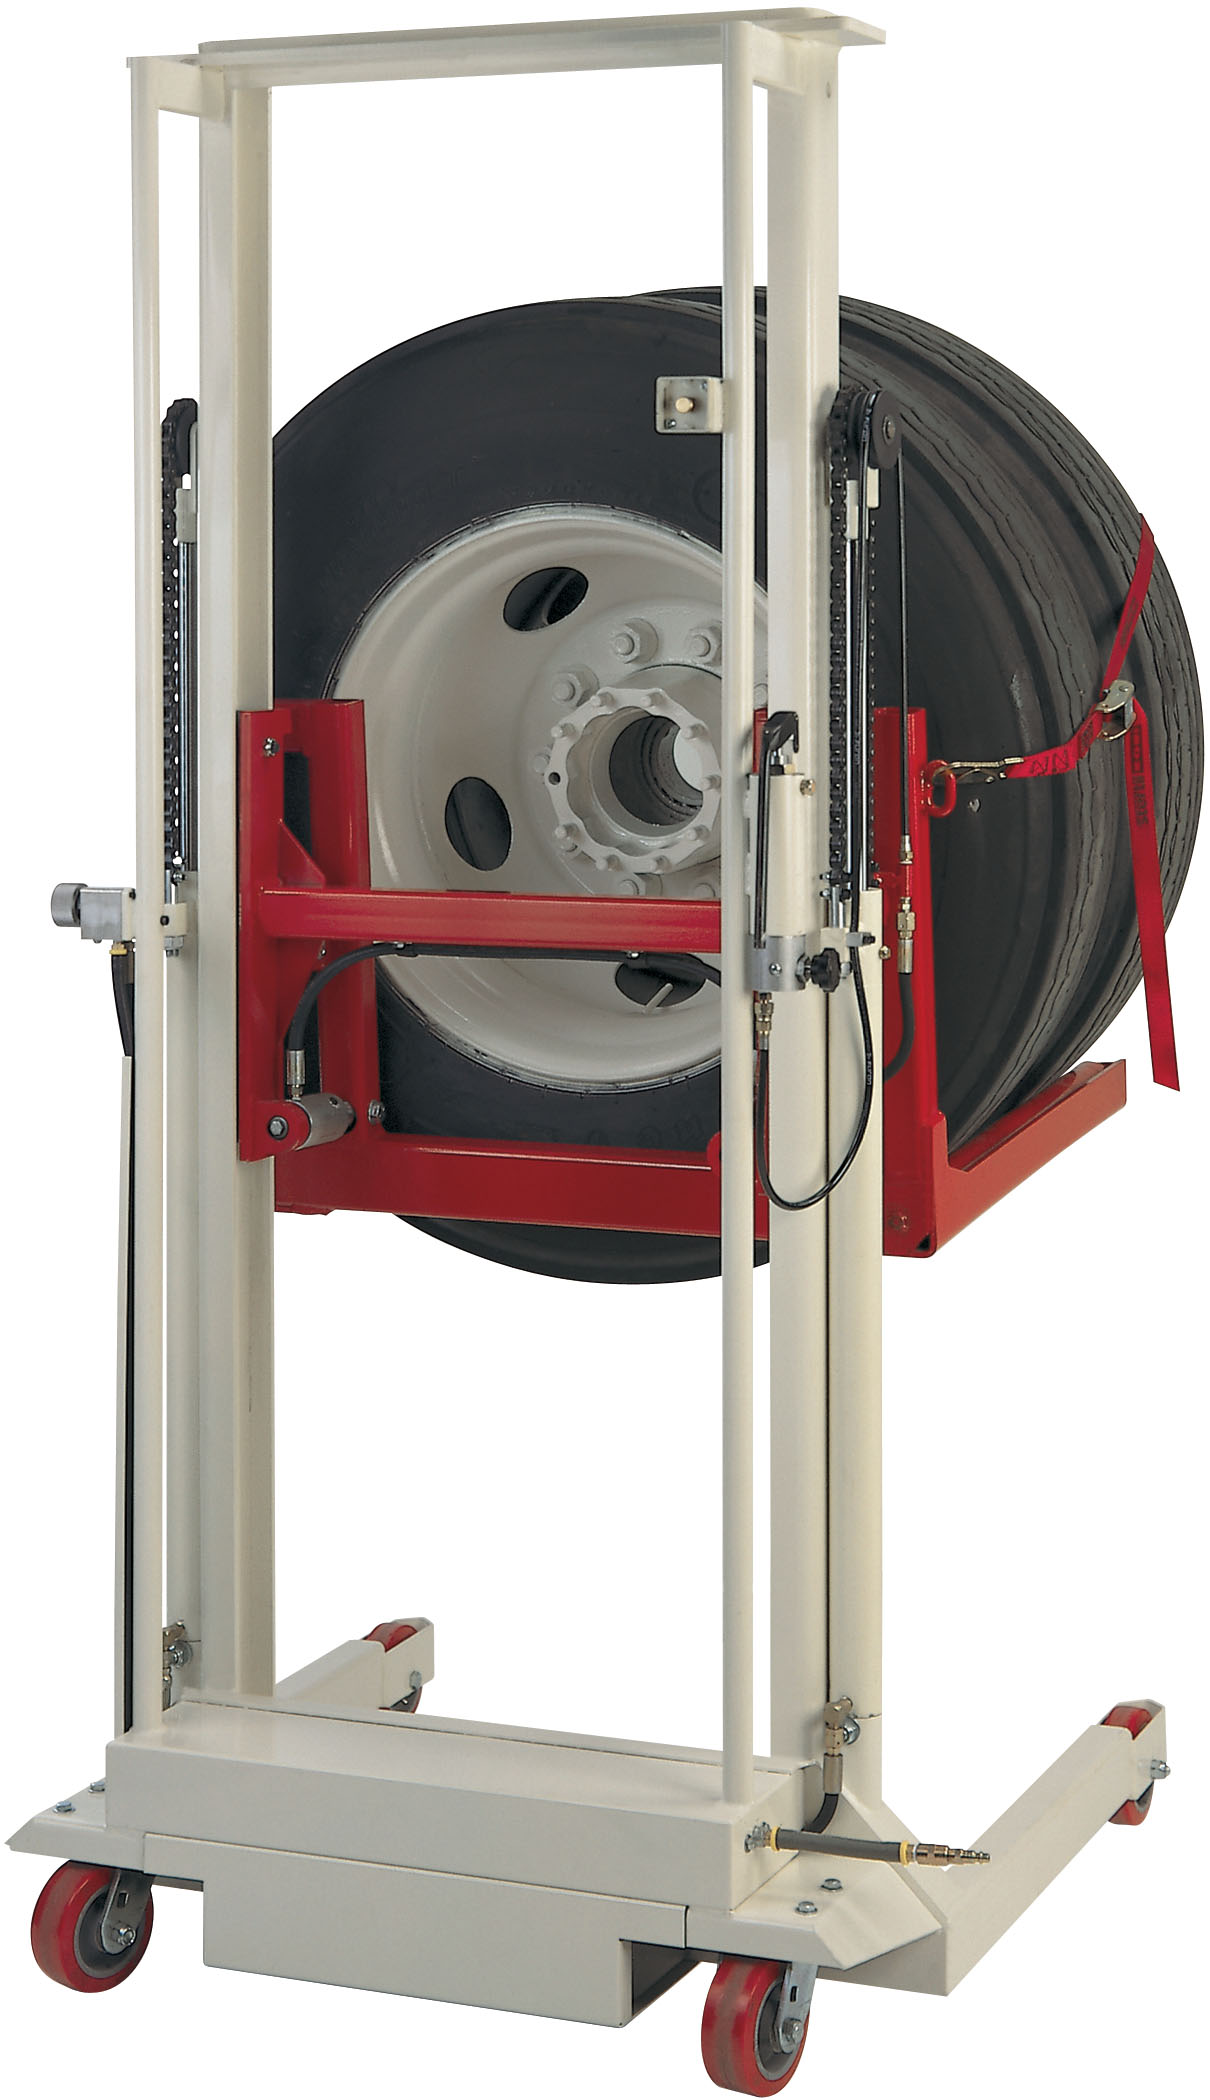 Wheel repairs are safe, quick, and ergonomic with a heavy duty wheel dolly